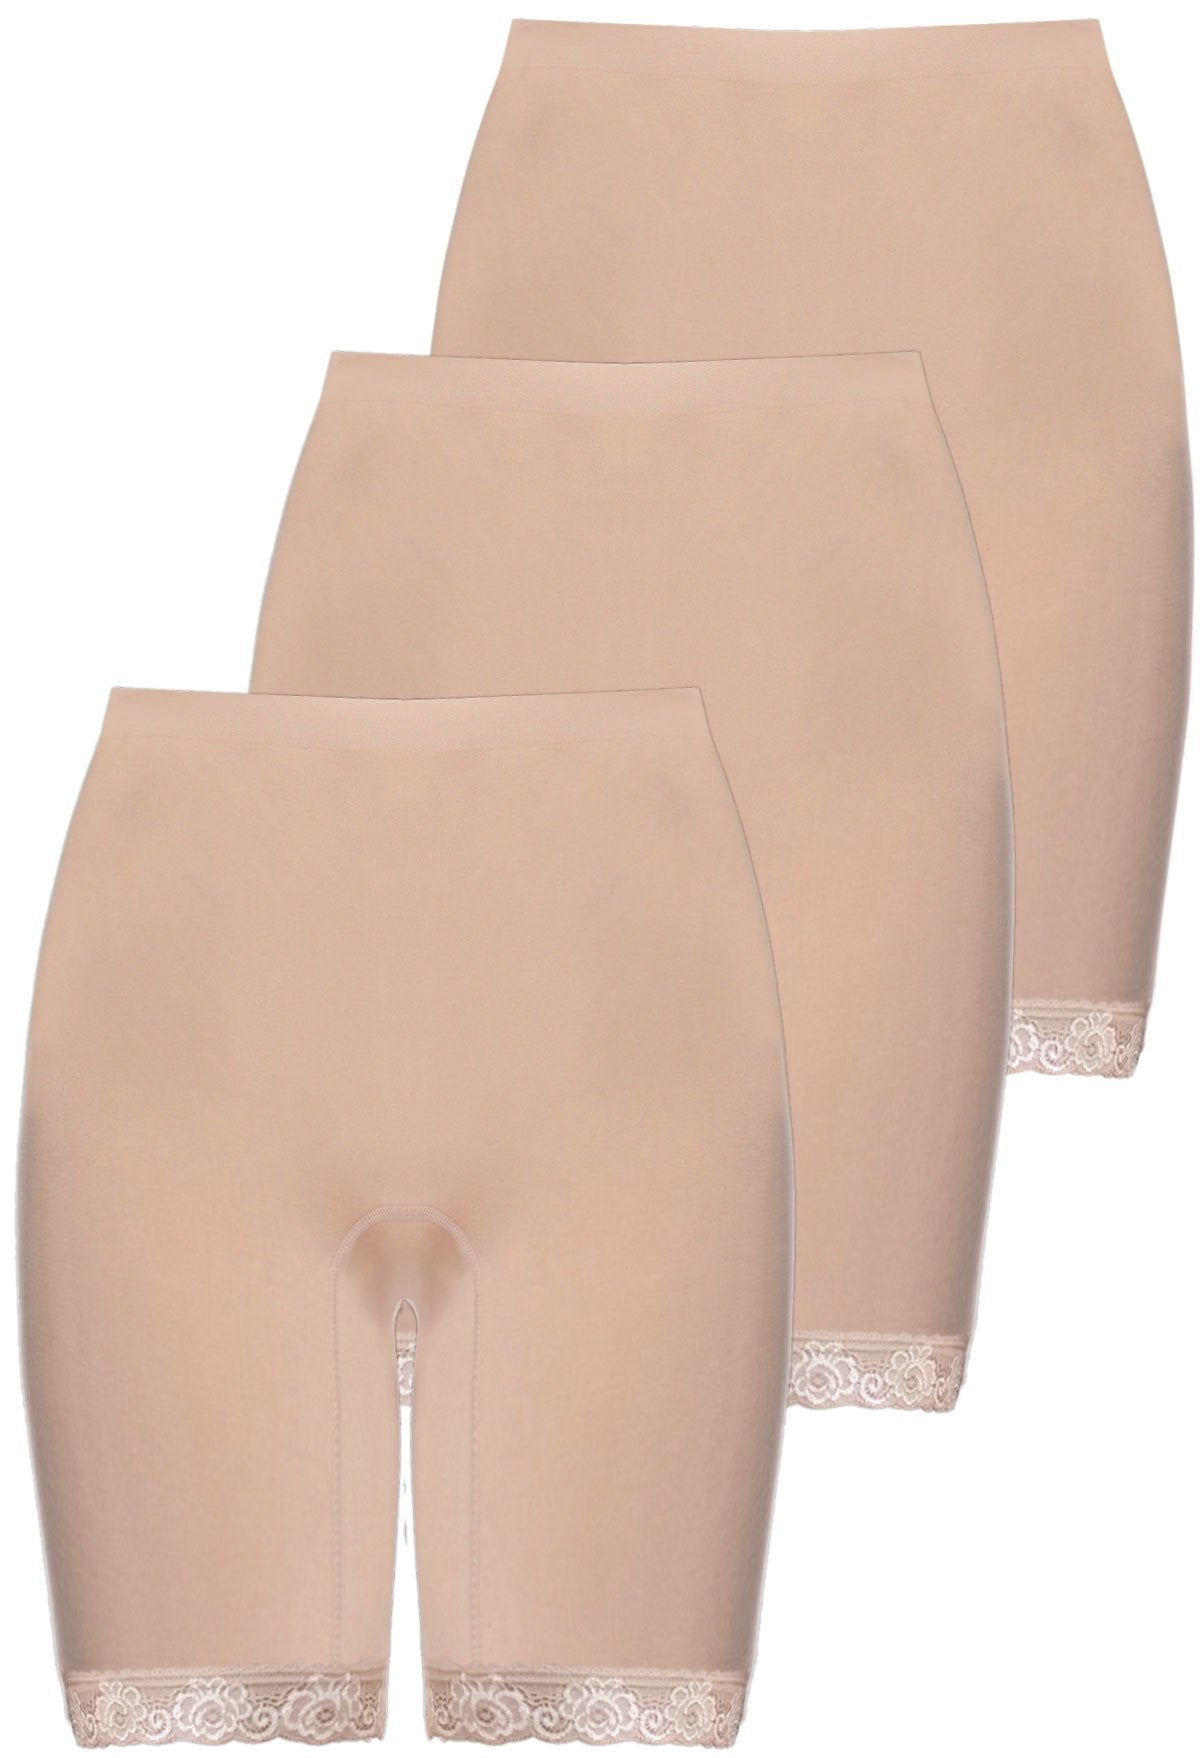 Cotton Anti-Chafing Leak Proof Incontinence Shorts